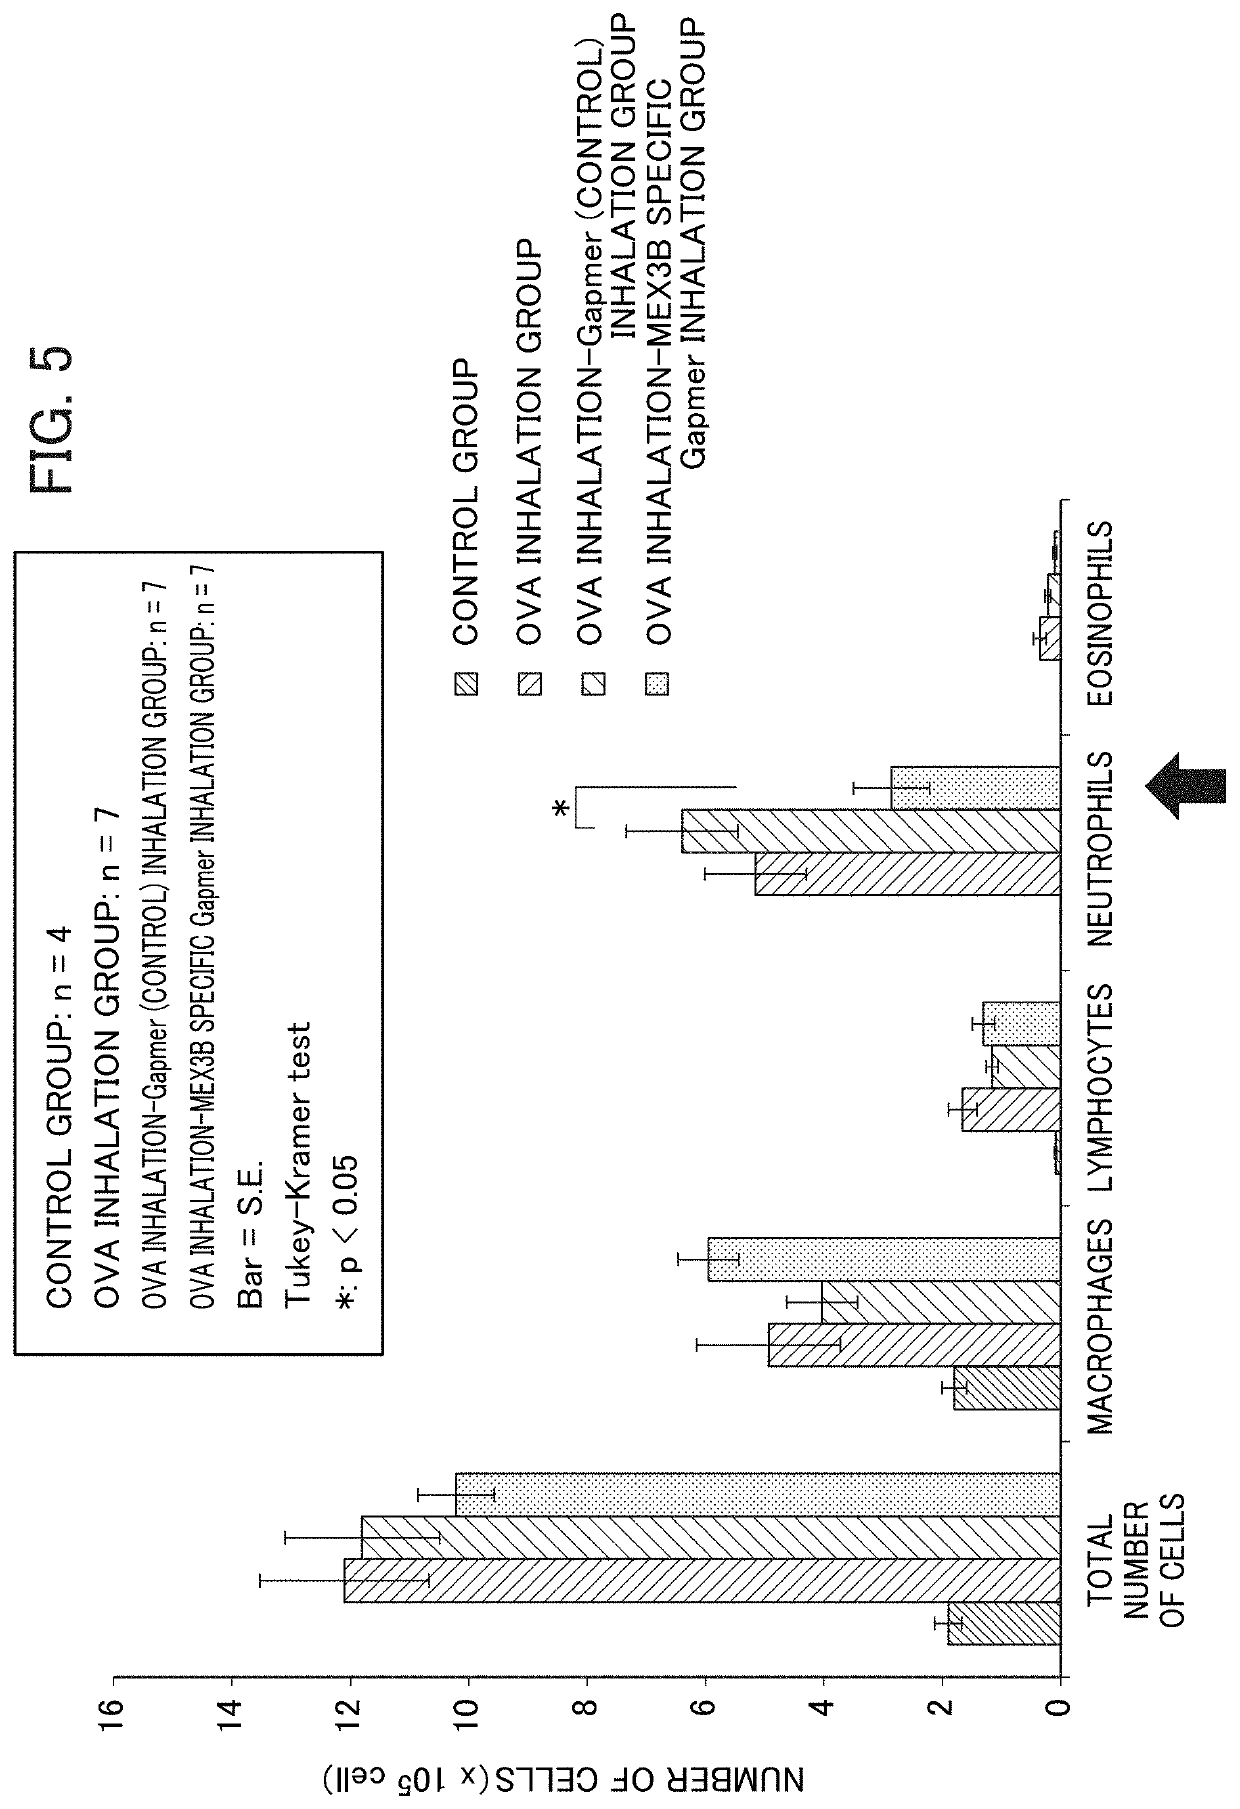 Method for screening prophylactic or therapeutic agents for diseases caused by interleukin 6, interleukin 13, TNF, G-CSF, CXCL1, CXCL2, or CXCL5 and agent for the prevention or treatment of diseases caused by interleukin 6, interleukin 13, TNF, G-CSF, CXCL1, CXCL2, or CXCL5